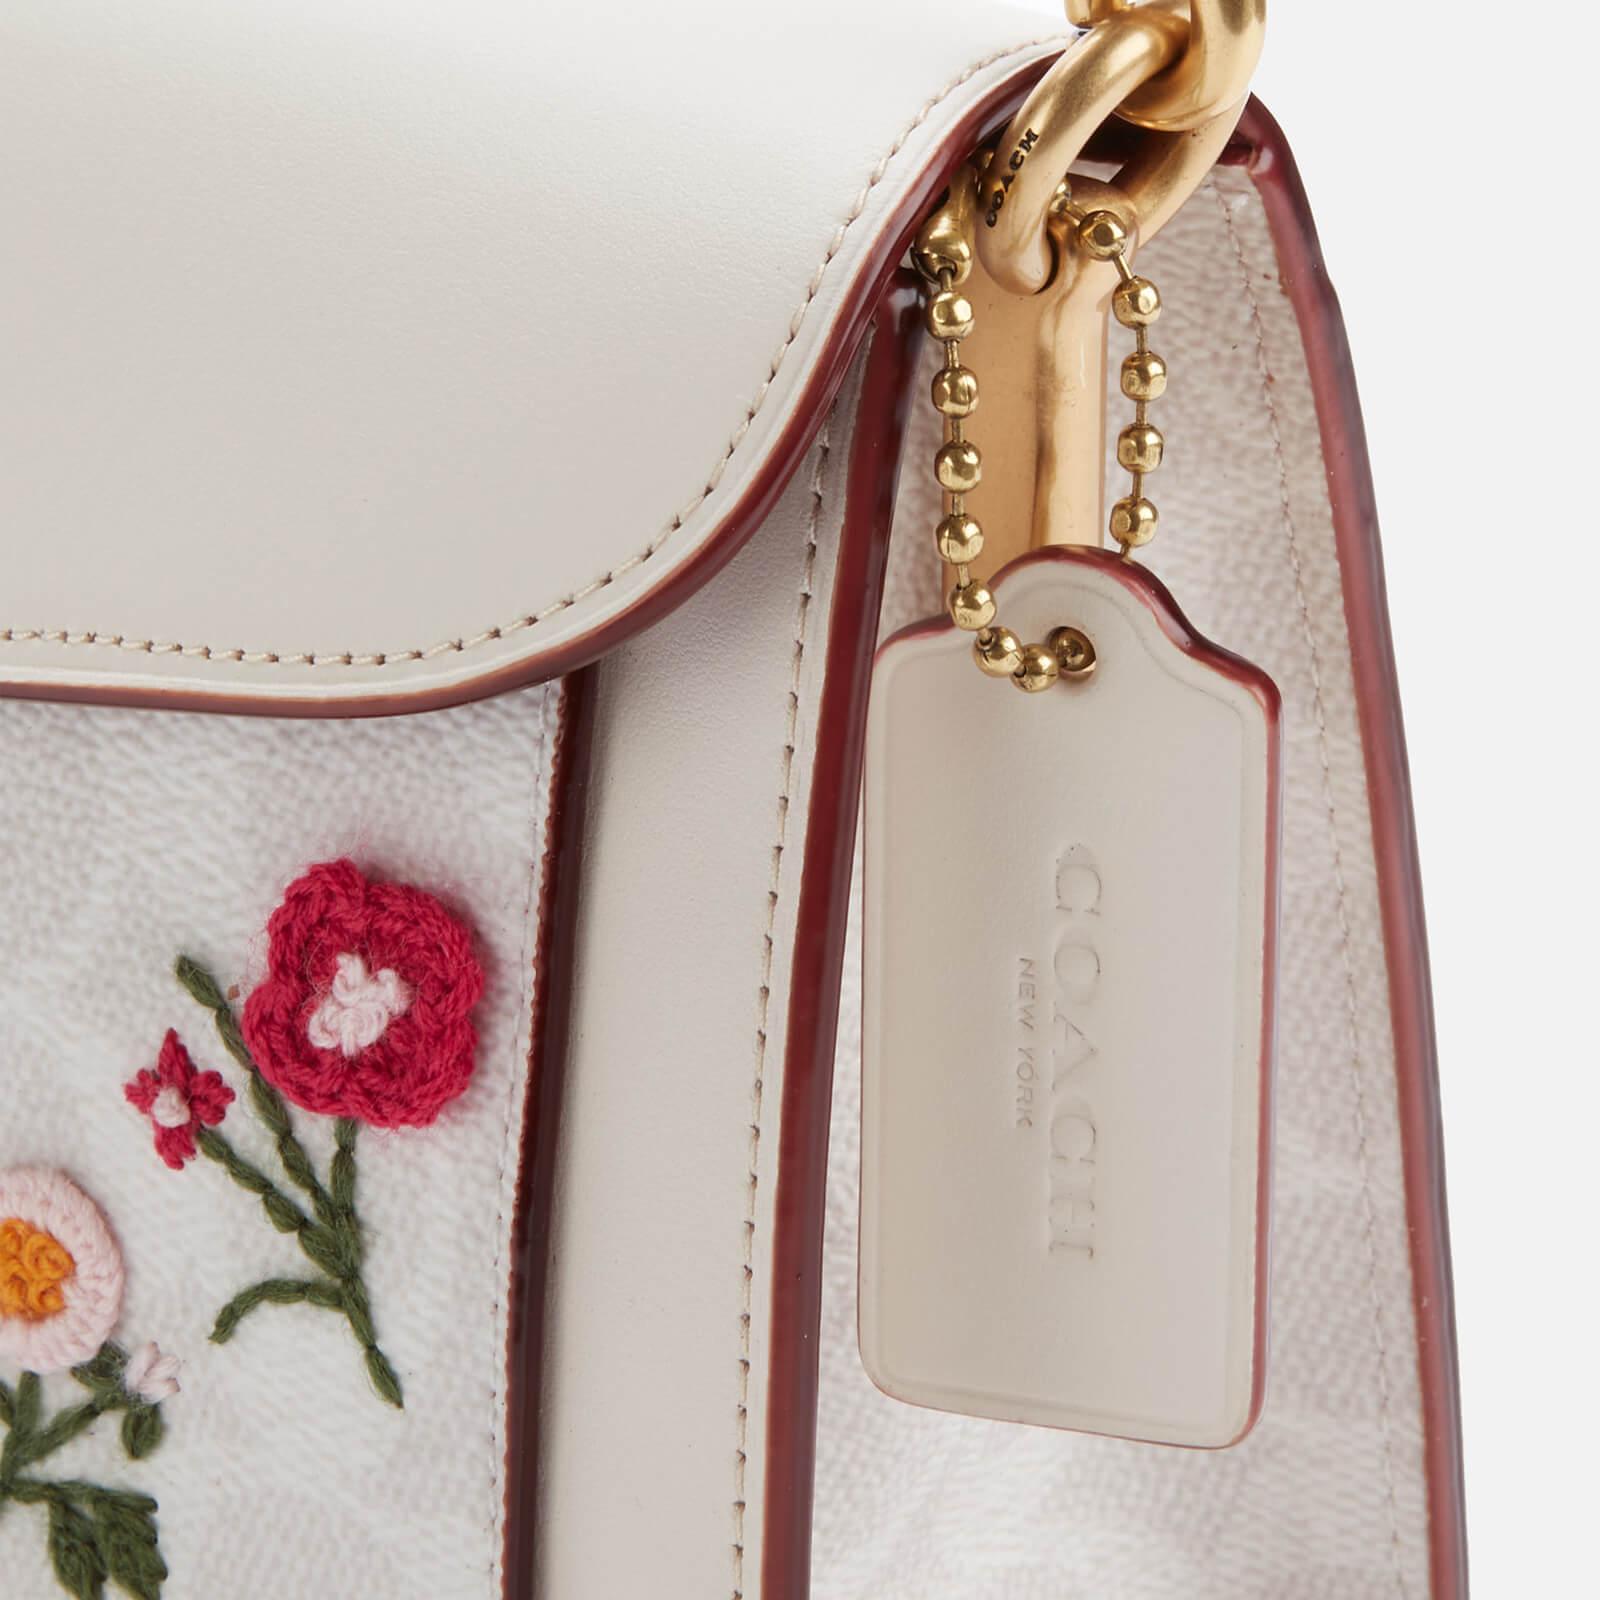 COACH Signature Floral Embroidery Tabby Shoulder Bag 26 in White